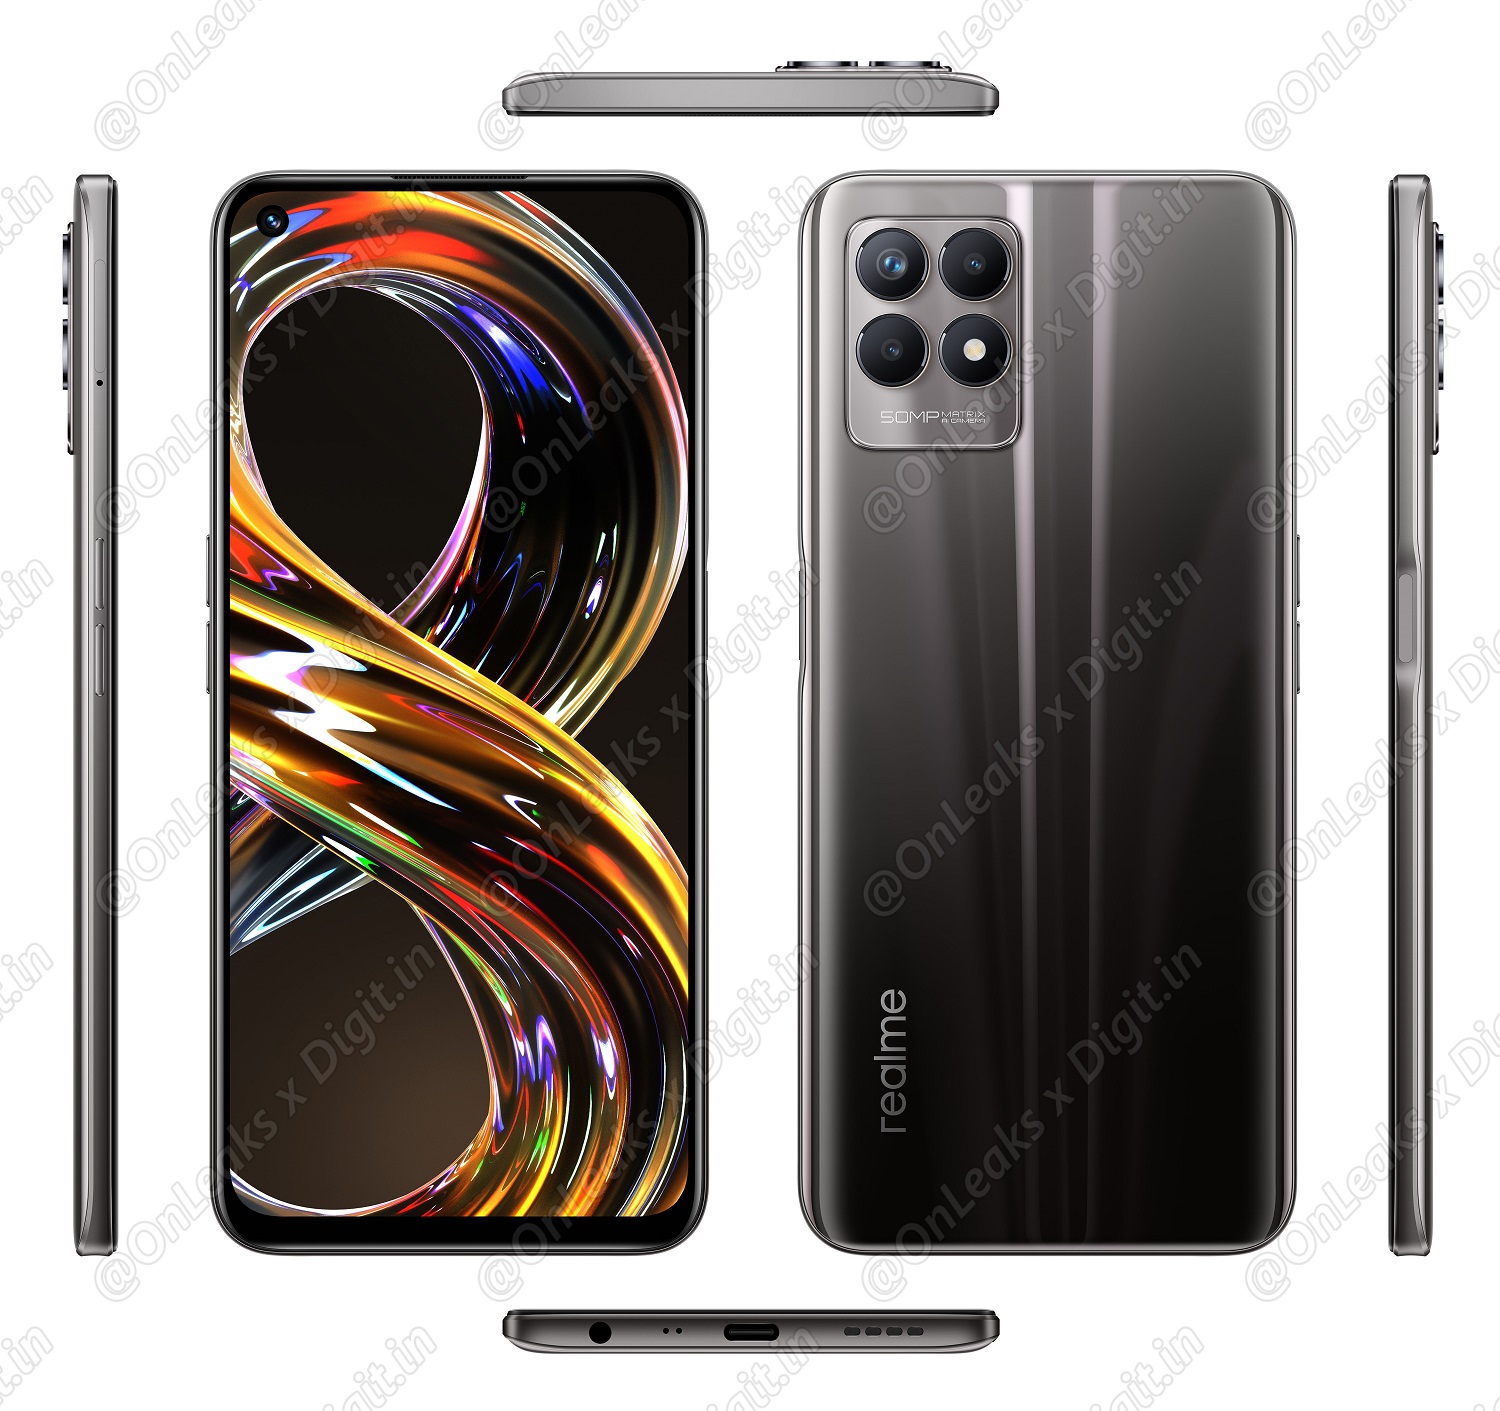 Helio G96, 120Hz screen and 50MP camera from €199 - Features and price of Realme 8i